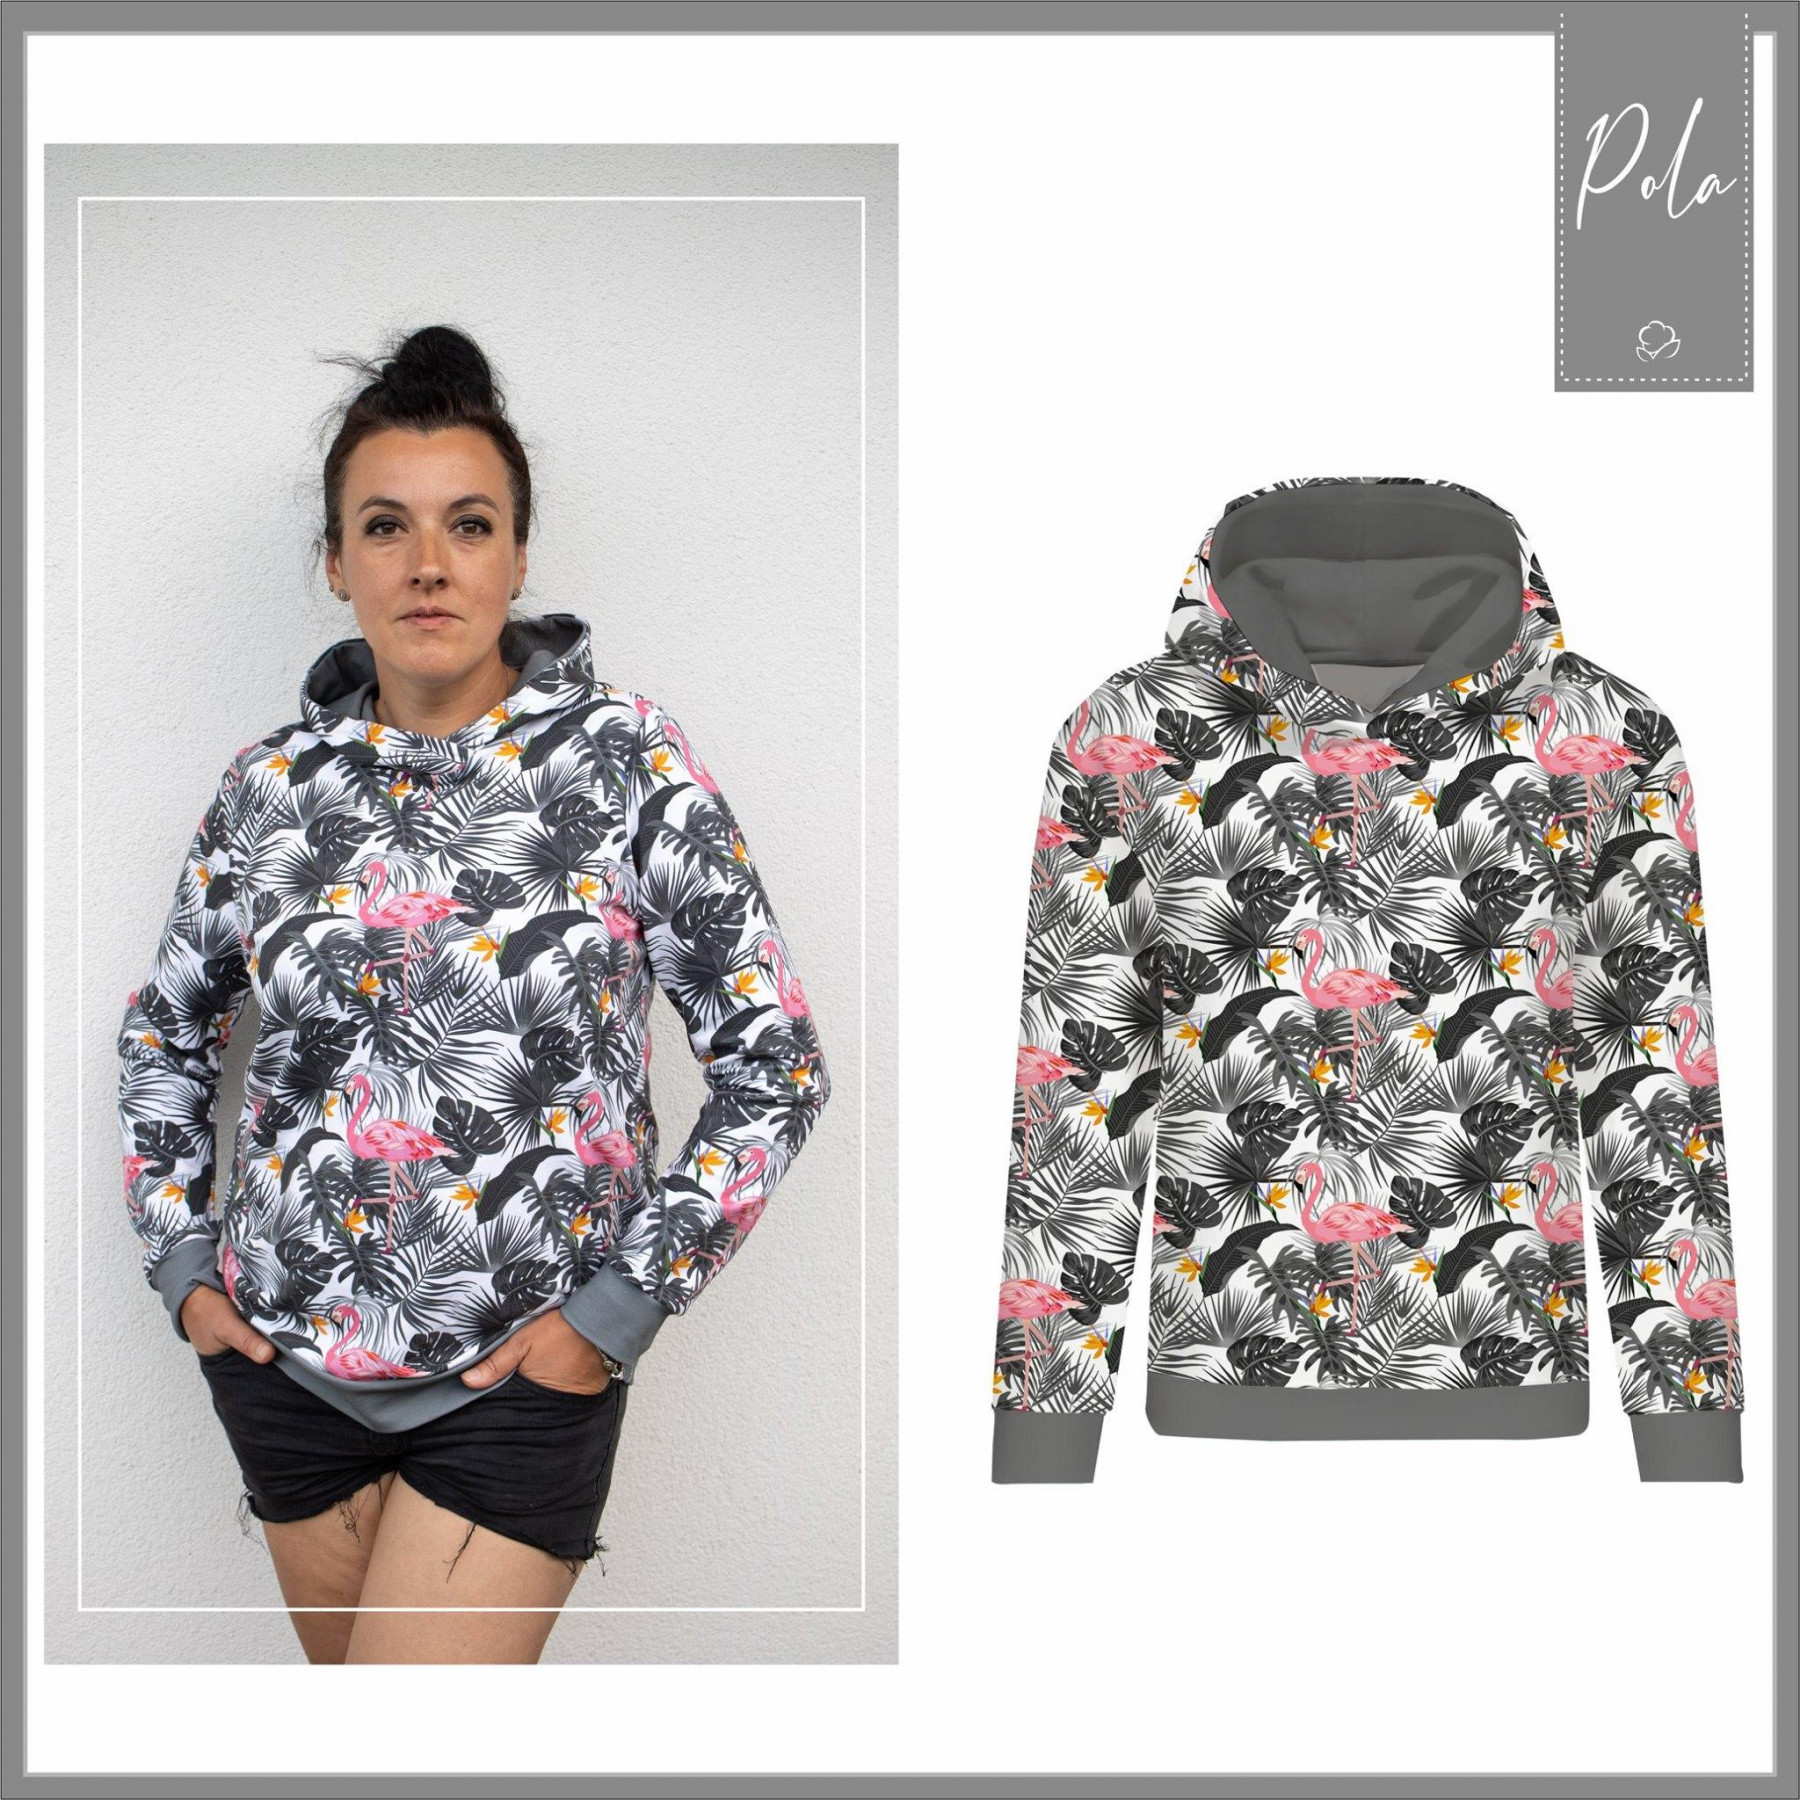 CLASSIC WOMEN’S HOODIE (POLA) - THE CREATION OF ADAM (Michelangelo) - sewing set